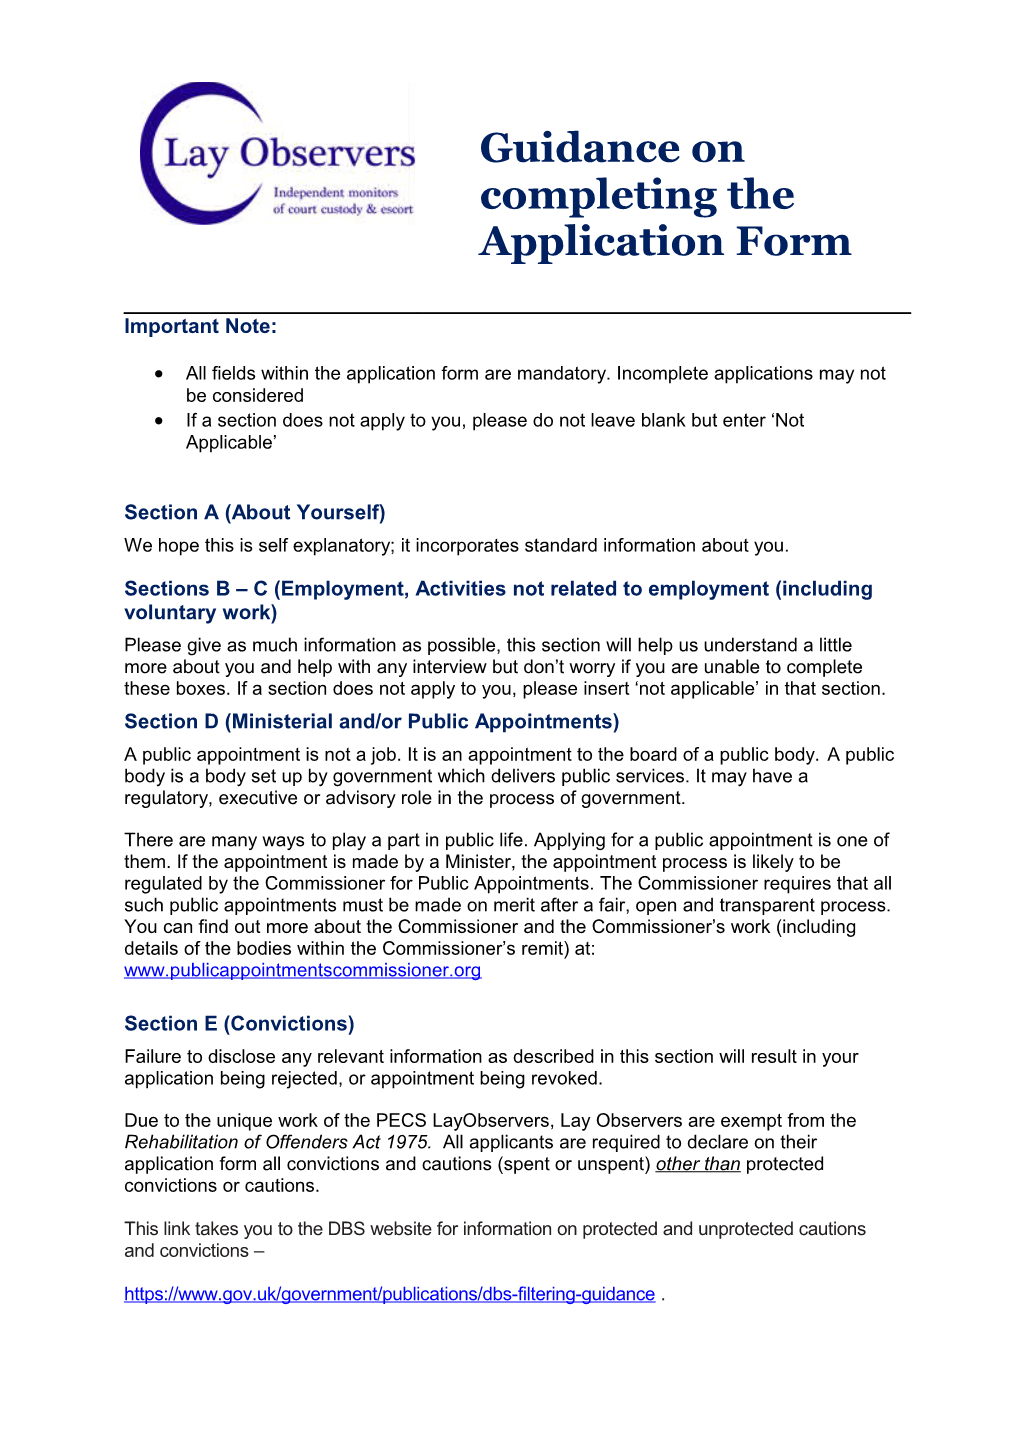 IMB Guidance on Completing the Application Form